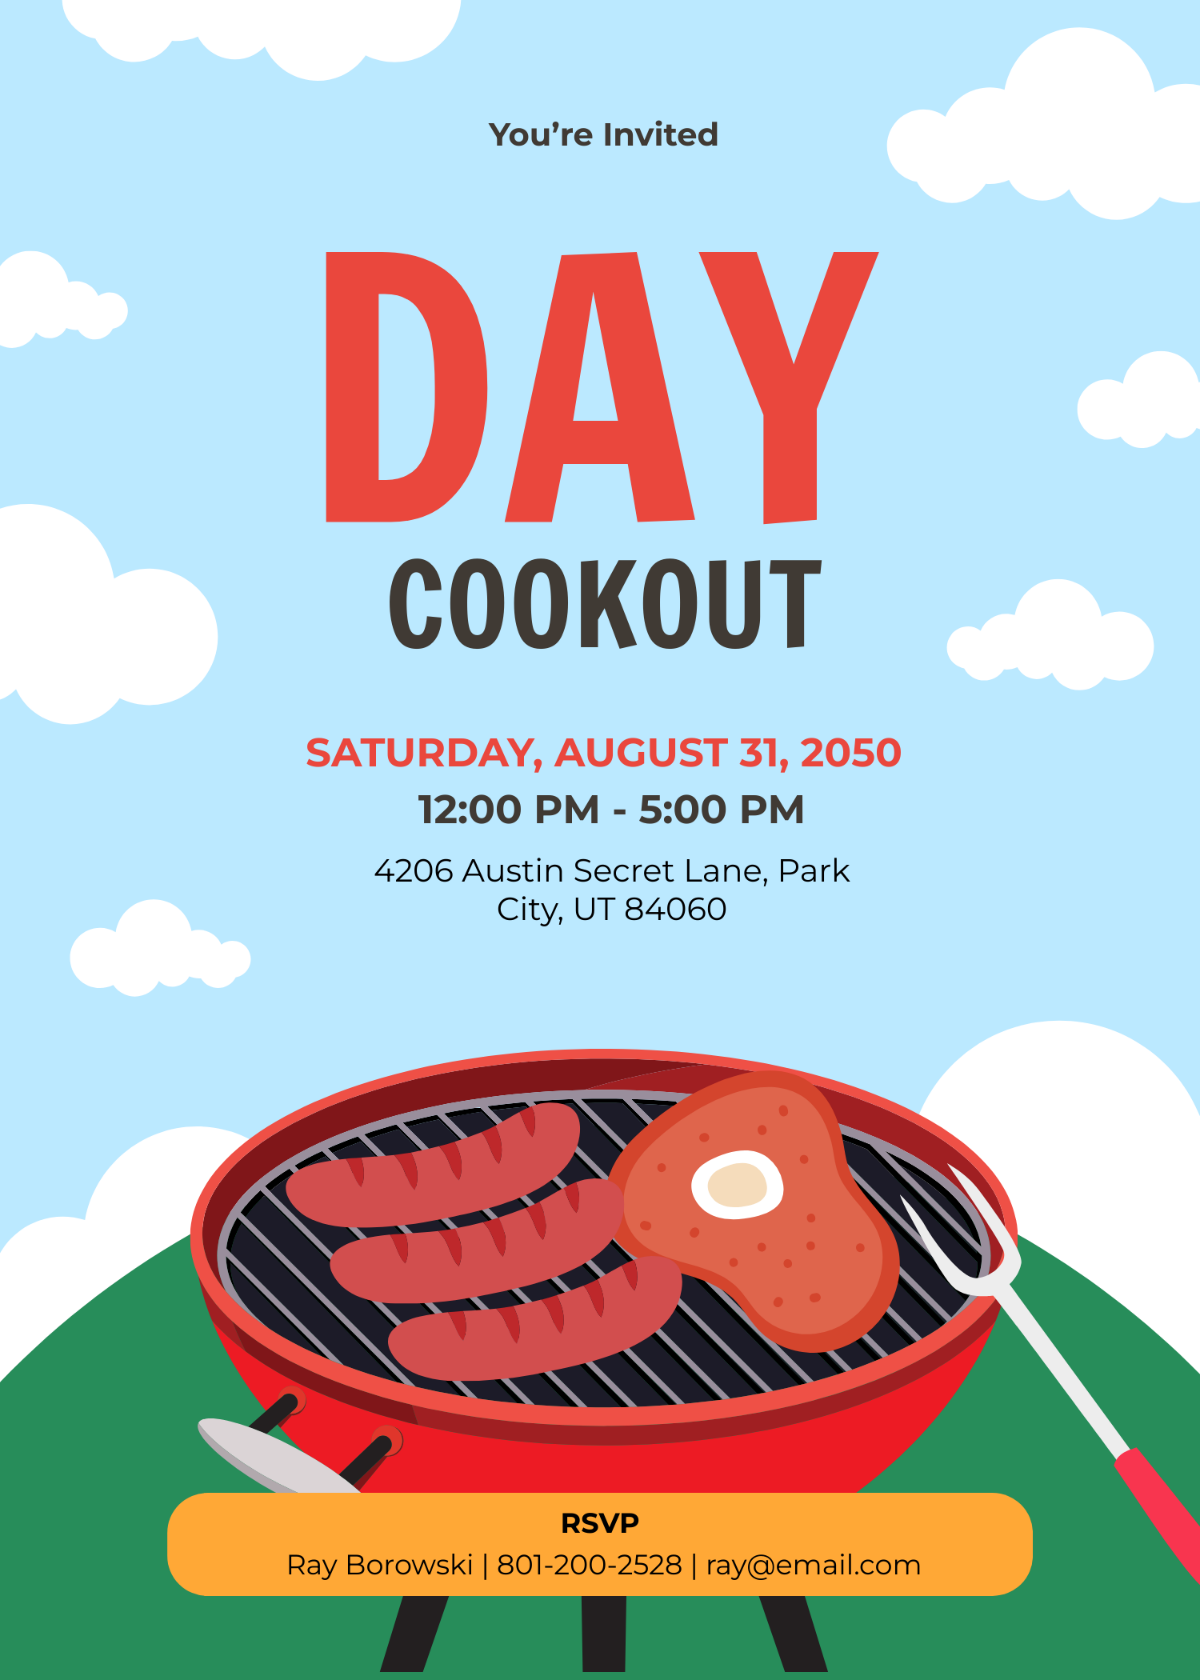 Day Cookout Invitation